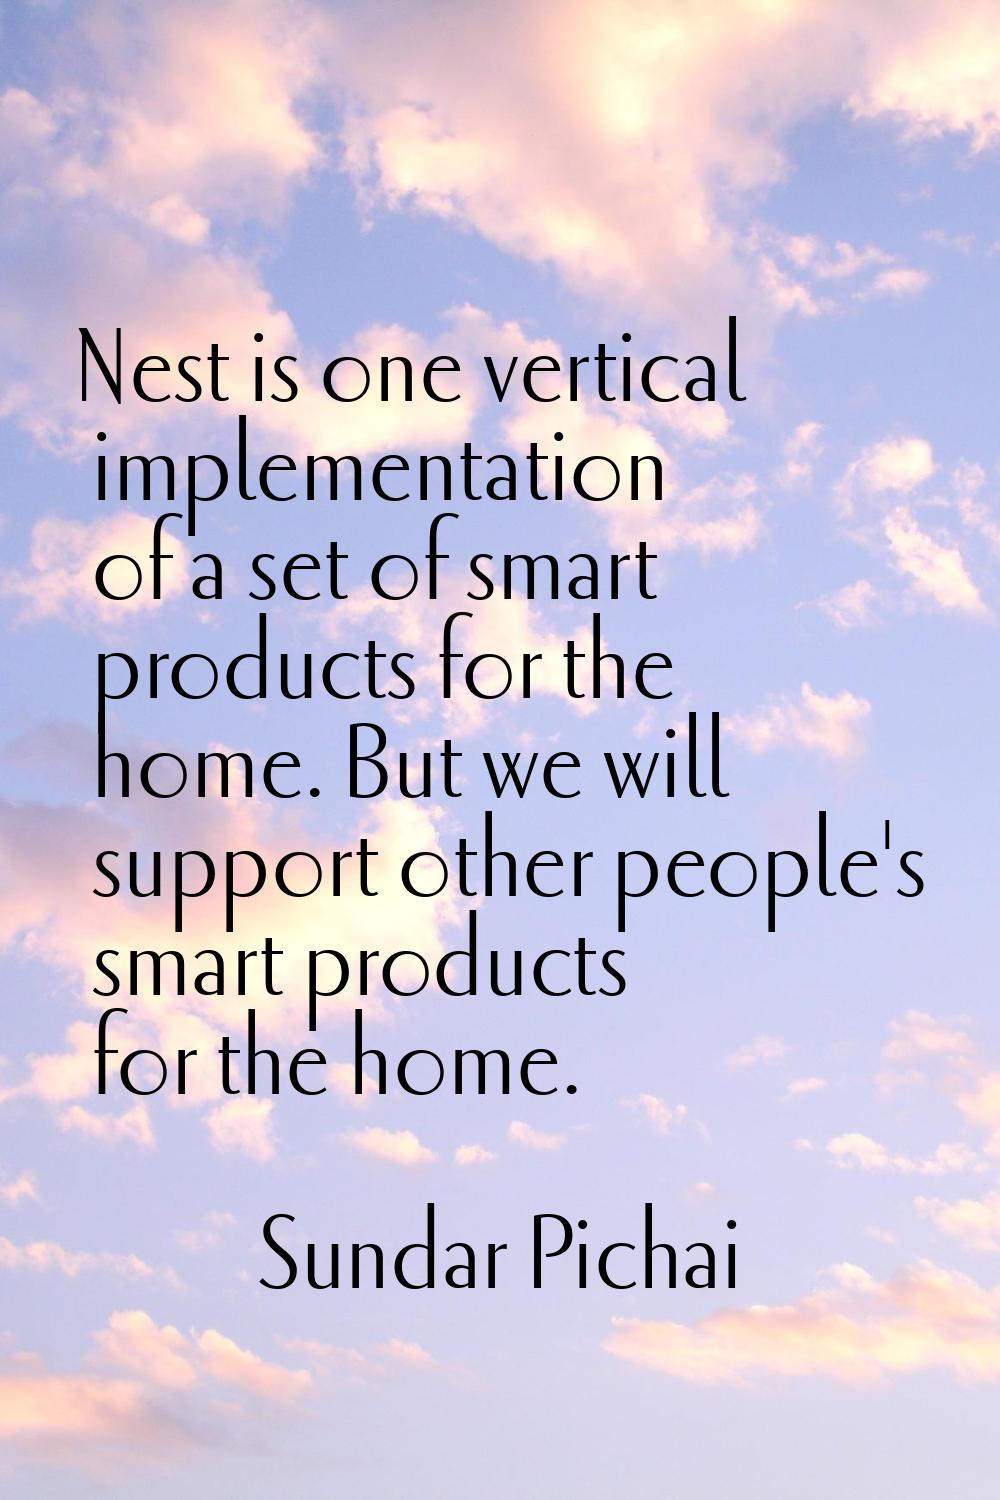 Nest is one vertical implementation of a set of smart products for the home. But we will support ot